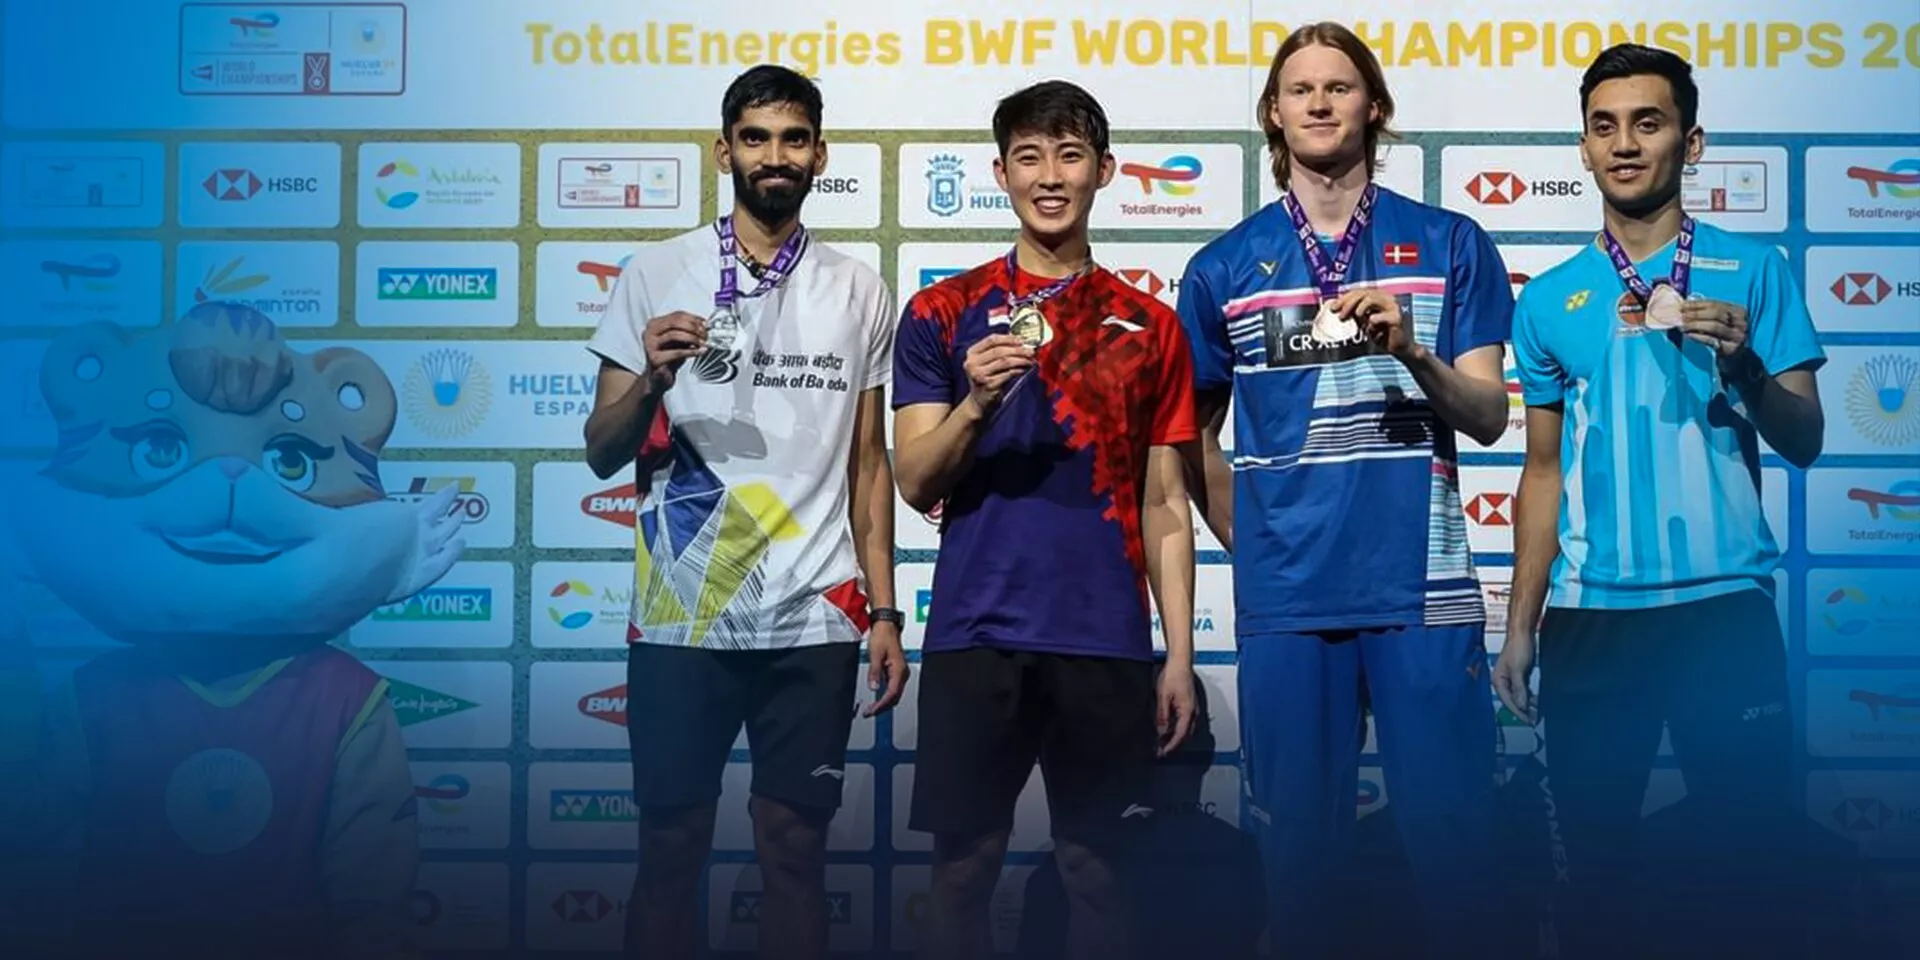 BWF World Championships 2021 What are Indias takeaways?